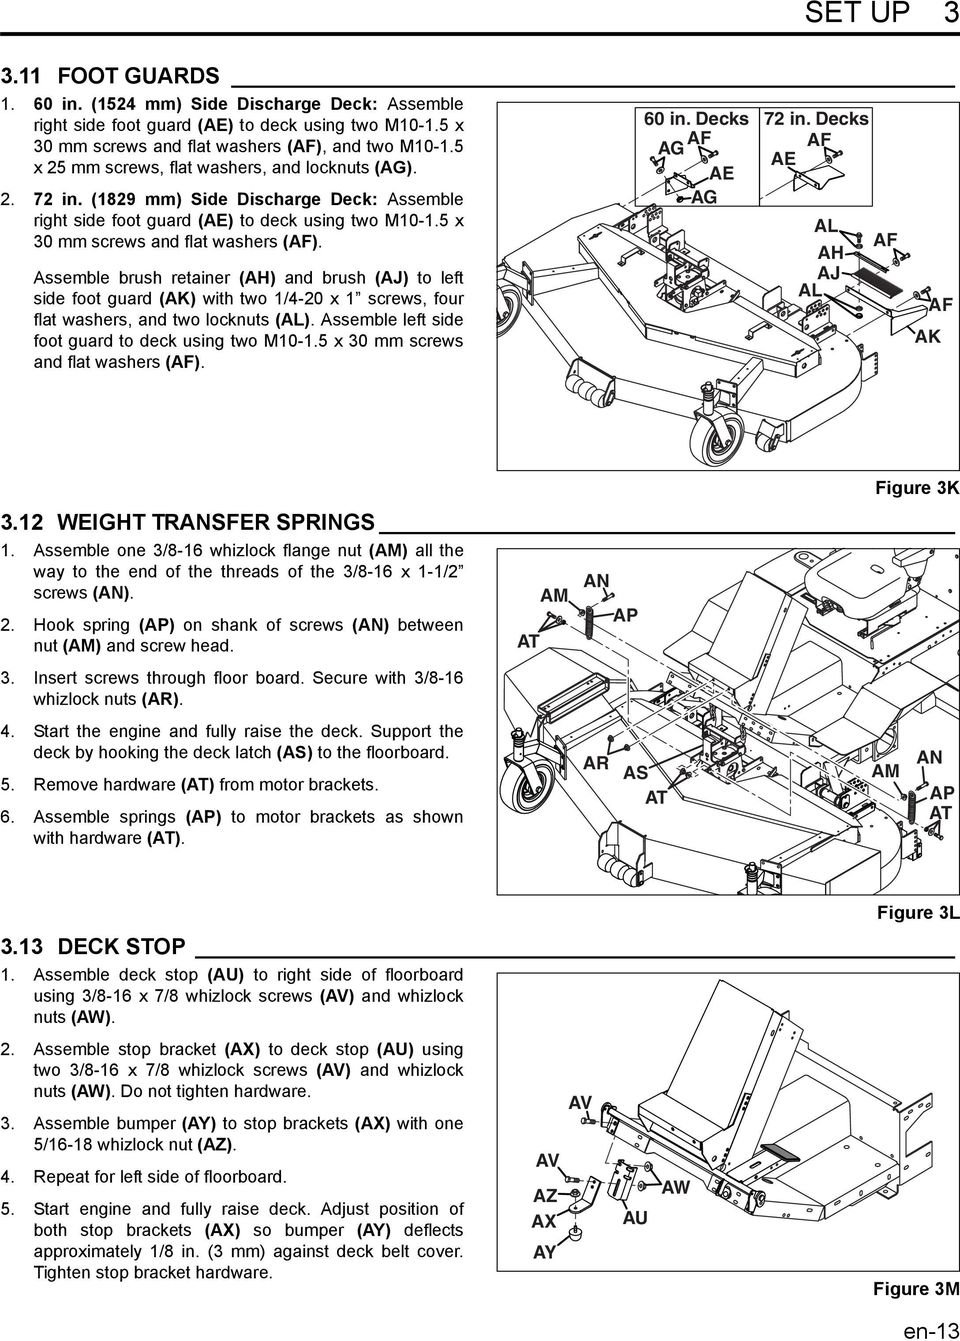 Assemble brush retainer (AH) and brush (AJ) to left side foot guard (AK) with two 1/4-20 x 1 screws, four flat washers, and two locknuts (AL). Assemble left side foot guard to deck using two M10-1.